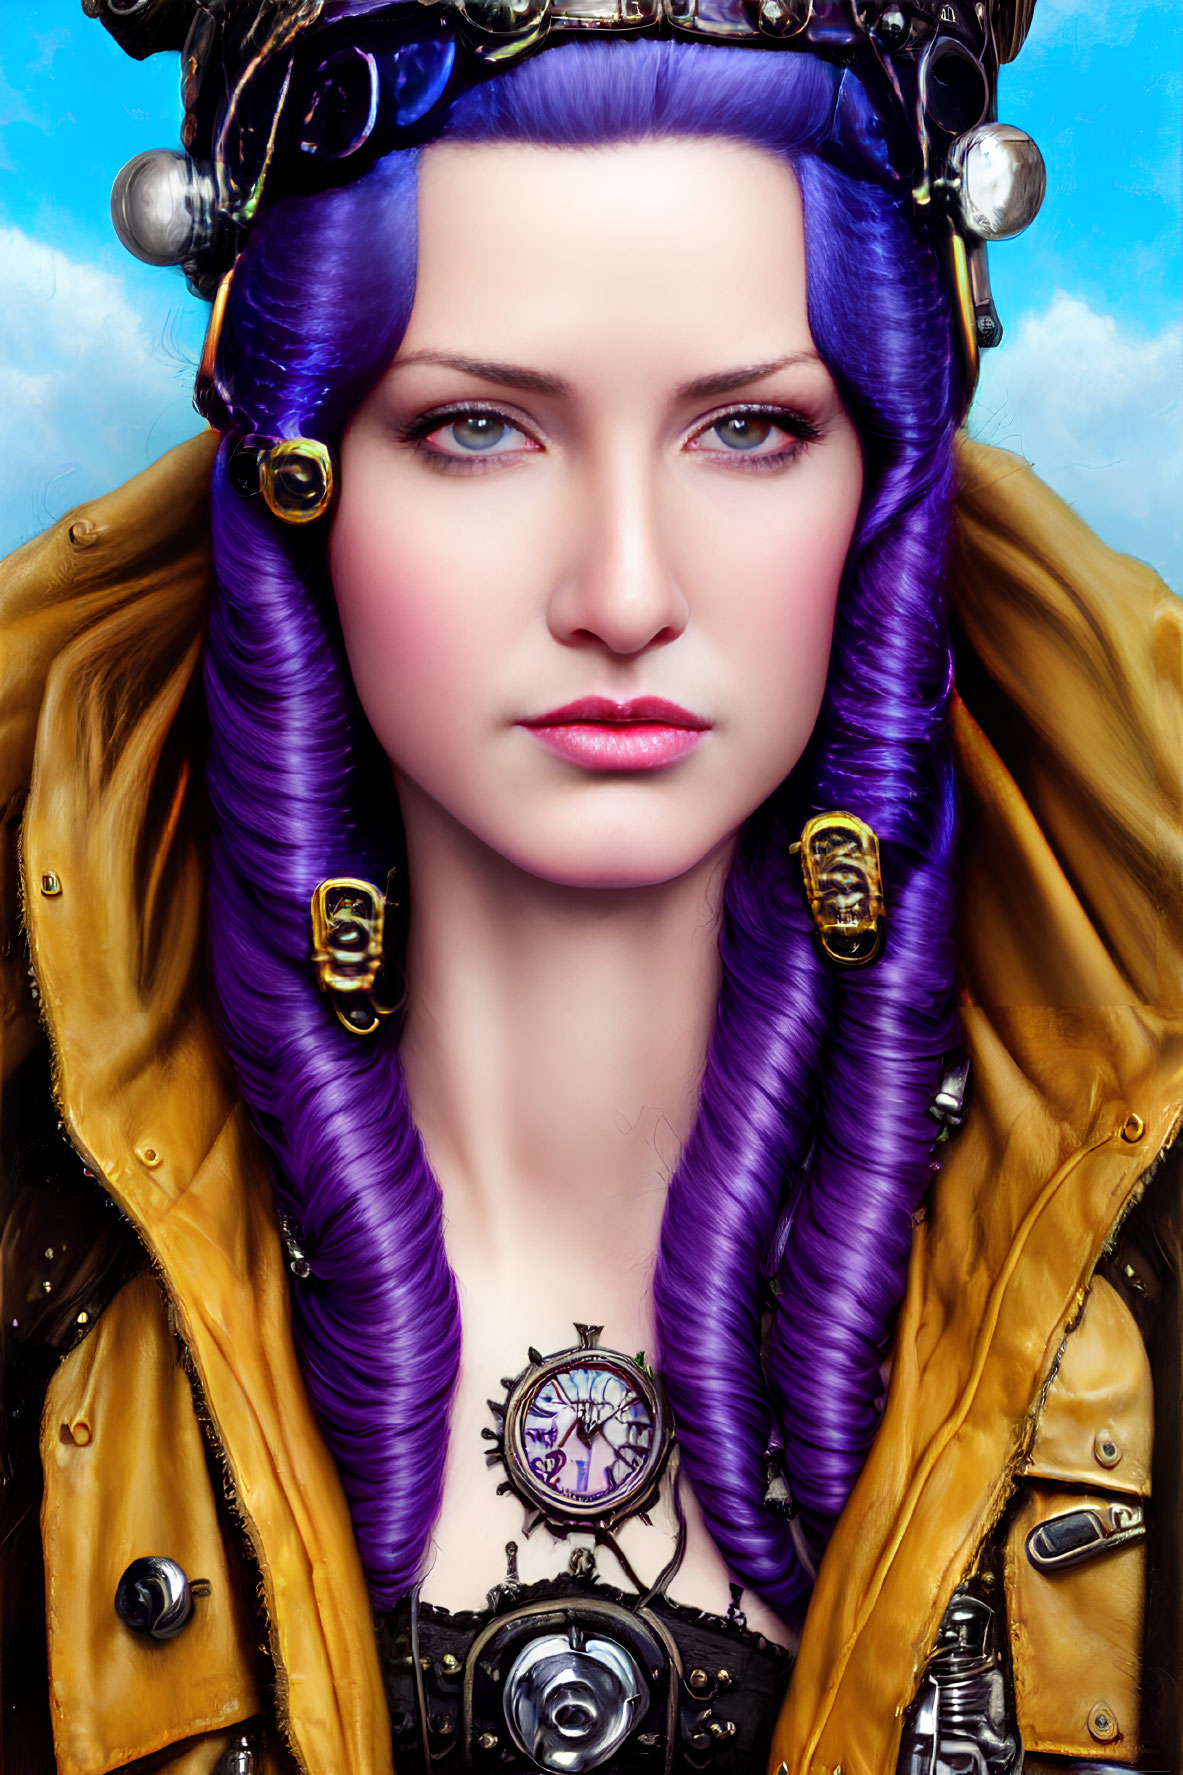 Digital artwork: Woman with purple hair, blue eyes, steampunk outfit & compass pendant